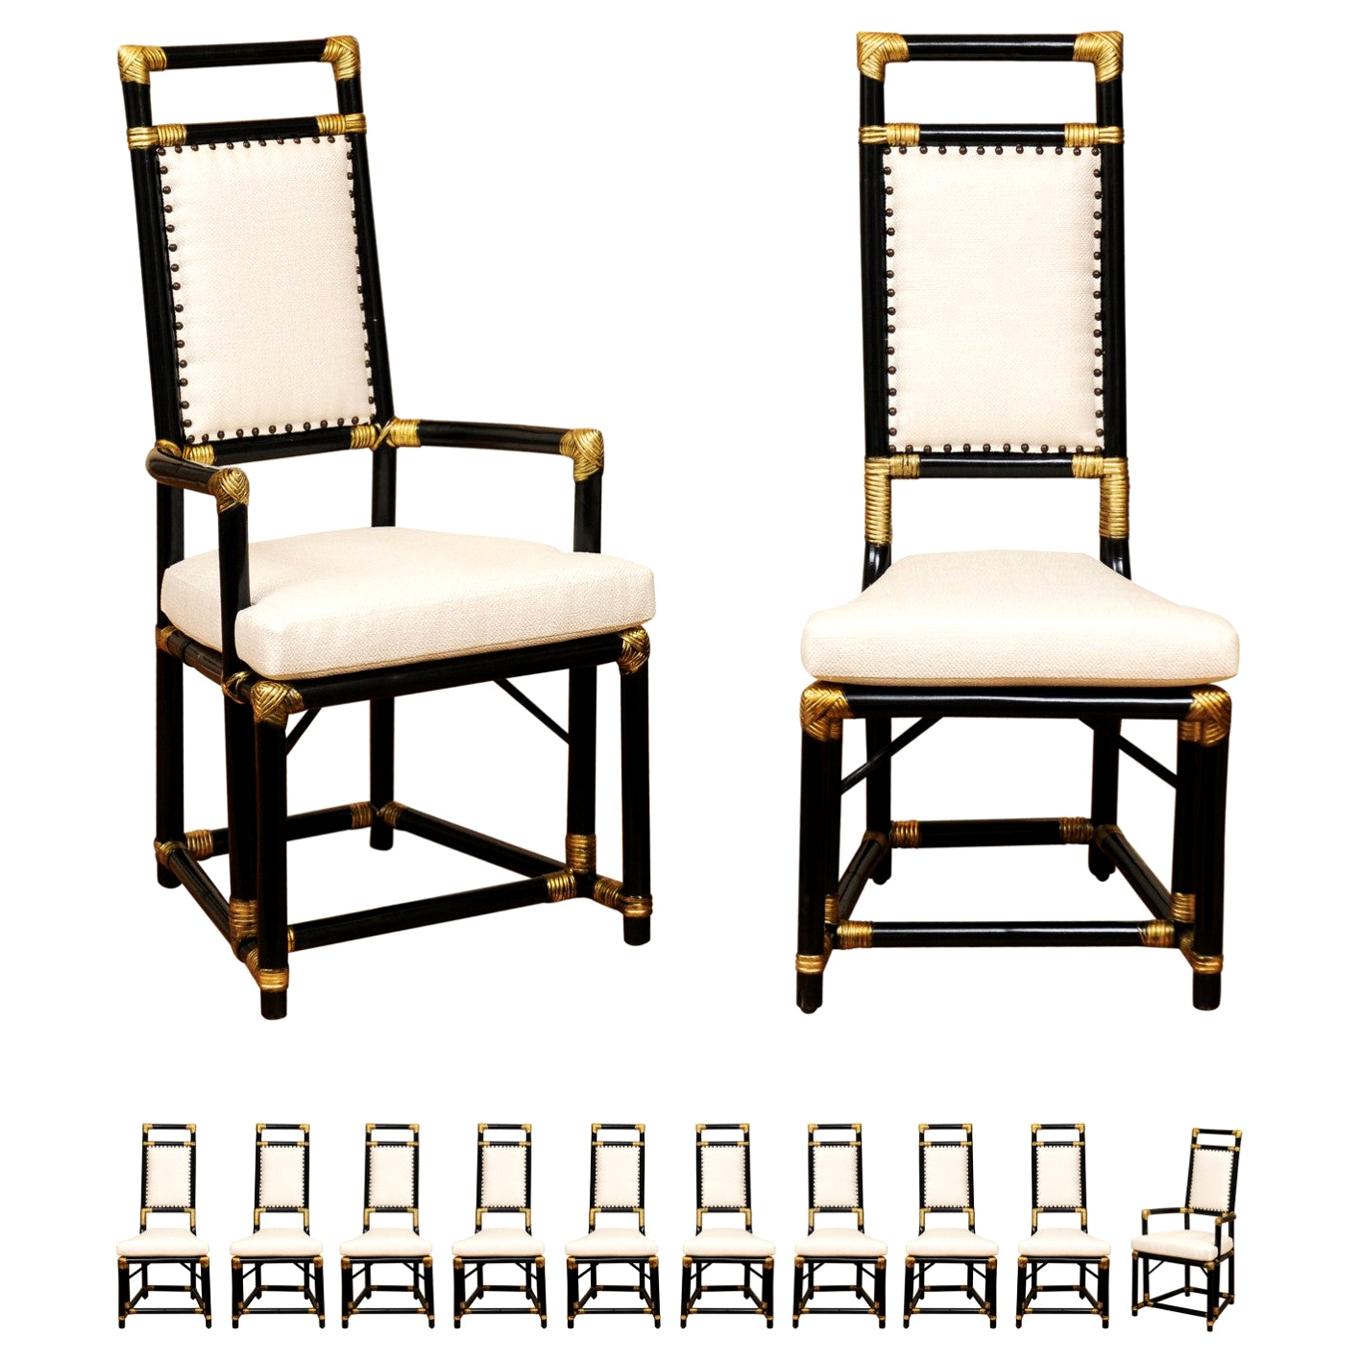 Regal Set of 12 Egyptian Revival Throne Dining Chairs by Henry Olko, circa 1955 For Sale